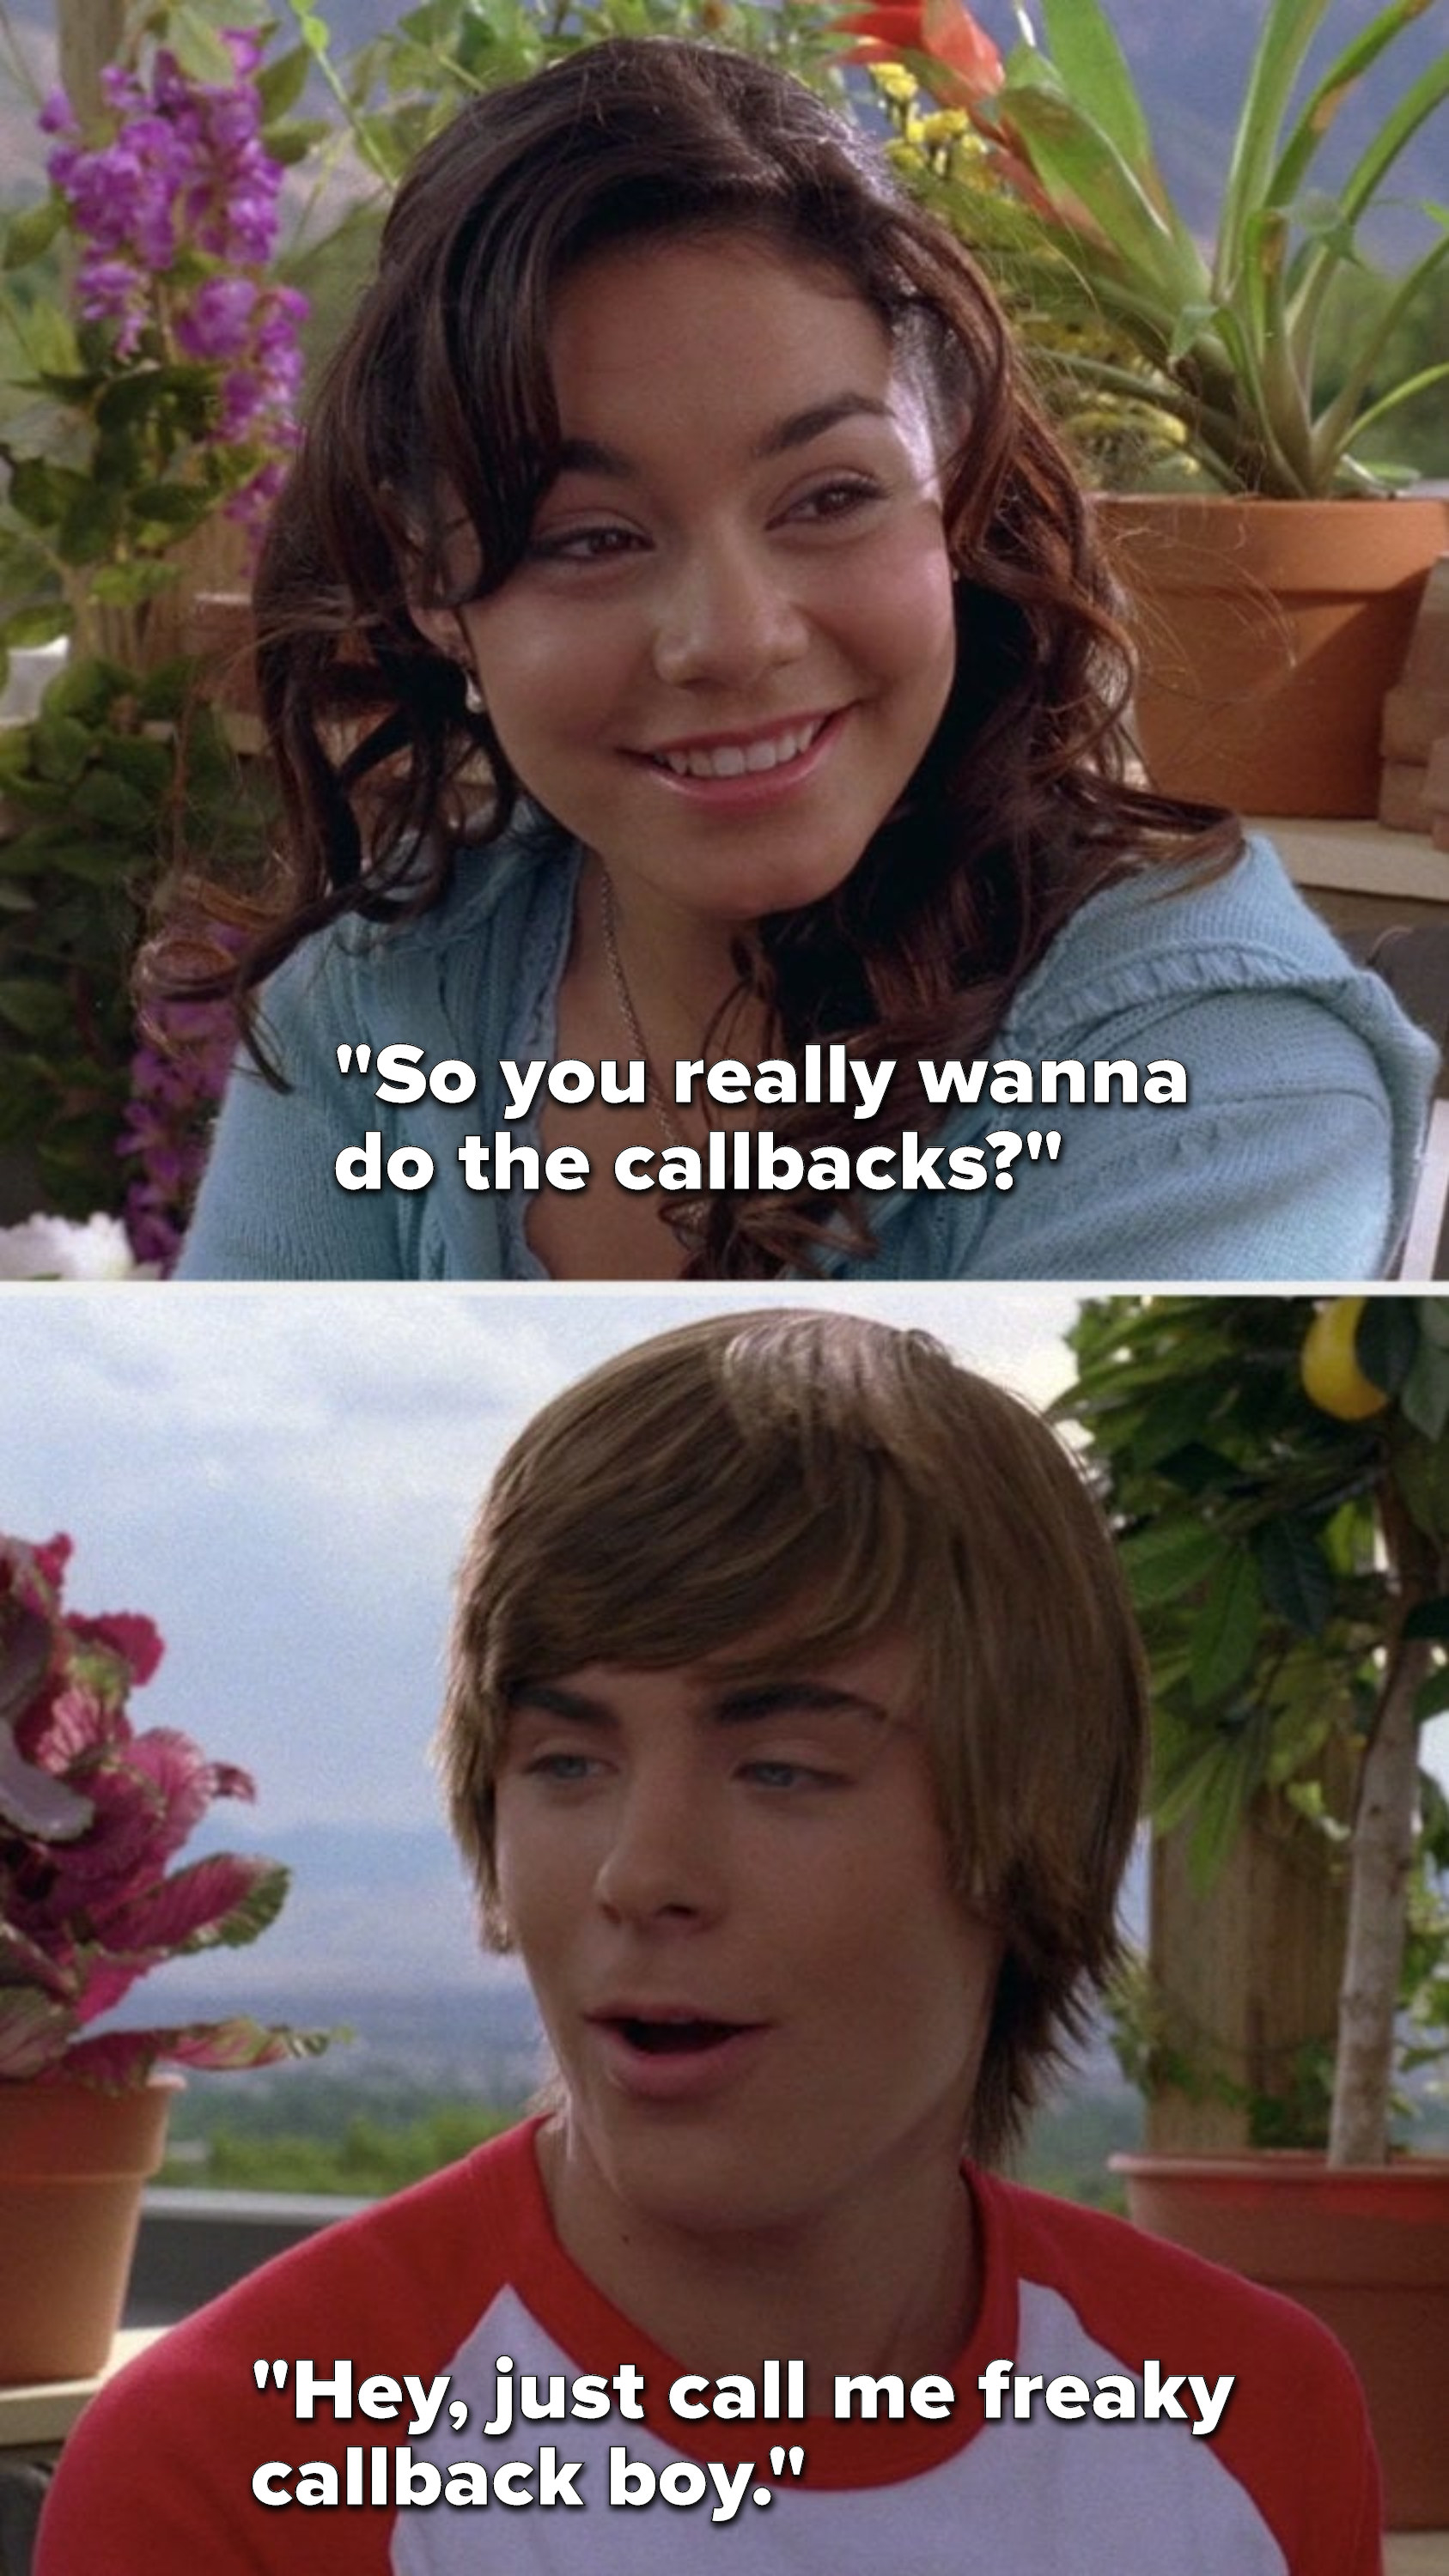 Gabriella asks, &quot;So you really wanna do the callbacks,&quot; and Troy says, &quot;Hey, just call me freaky callback boy&quot;